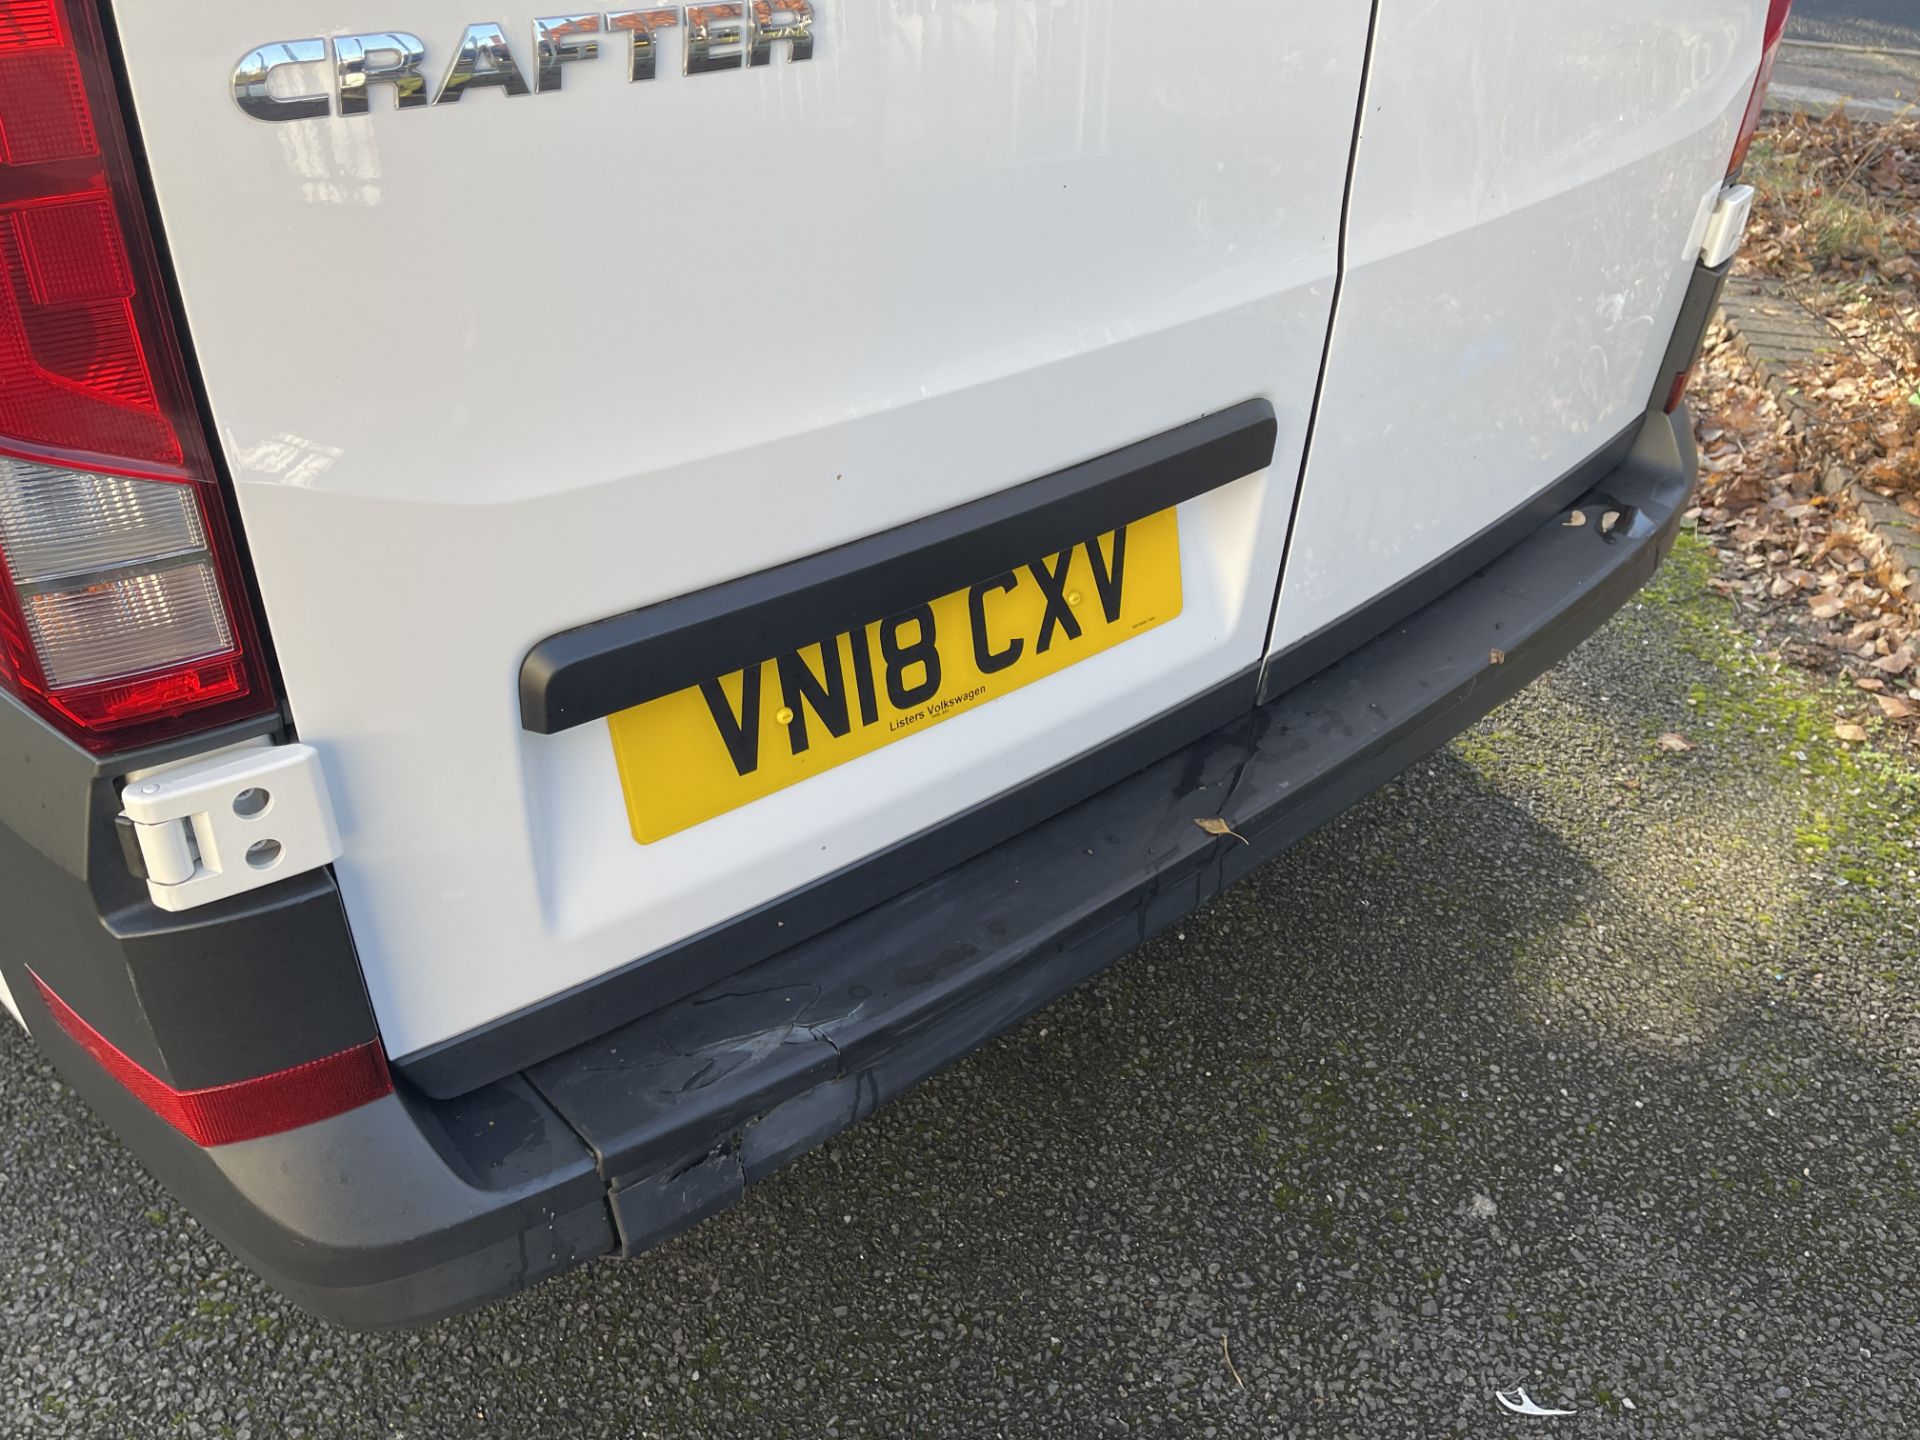 2018 - VW Crafter CR35 102PS Trend Line LWB TDI - Image 11 of 34